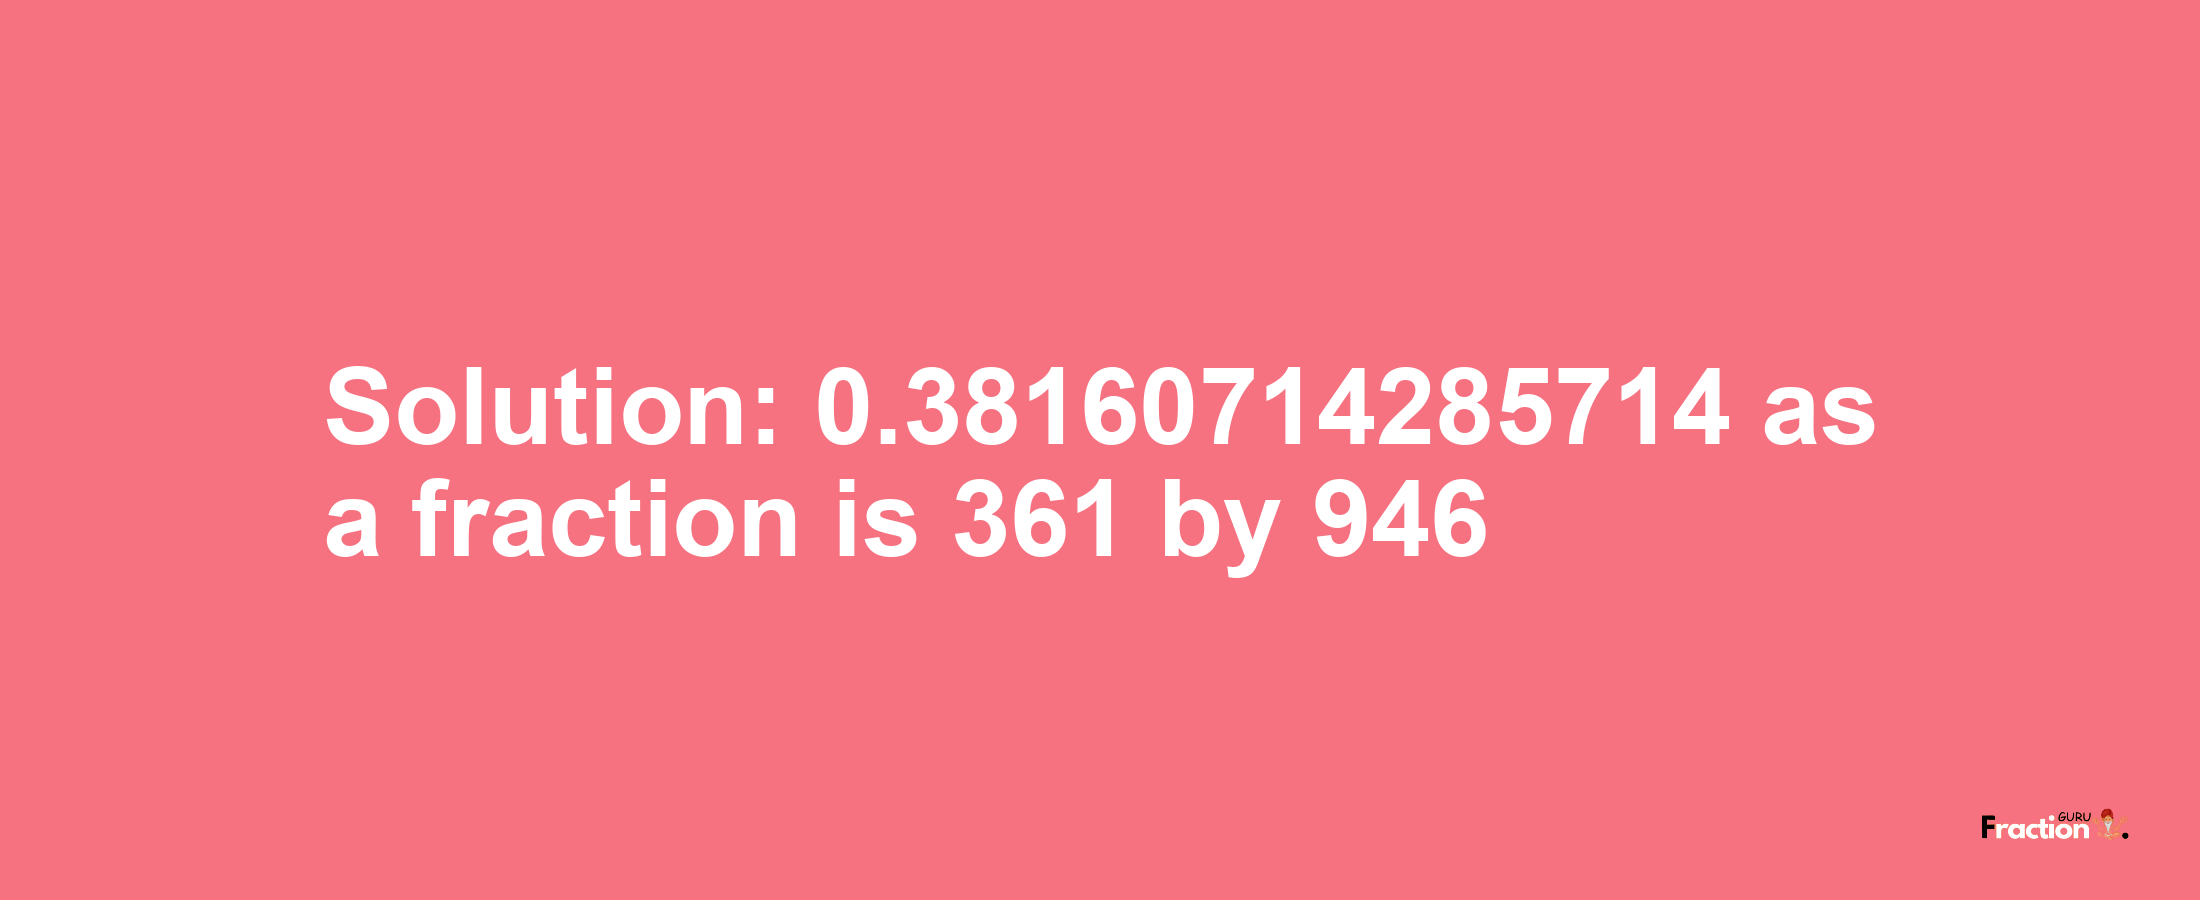 Solution:0.38160714285714 as a fraction is 361/946